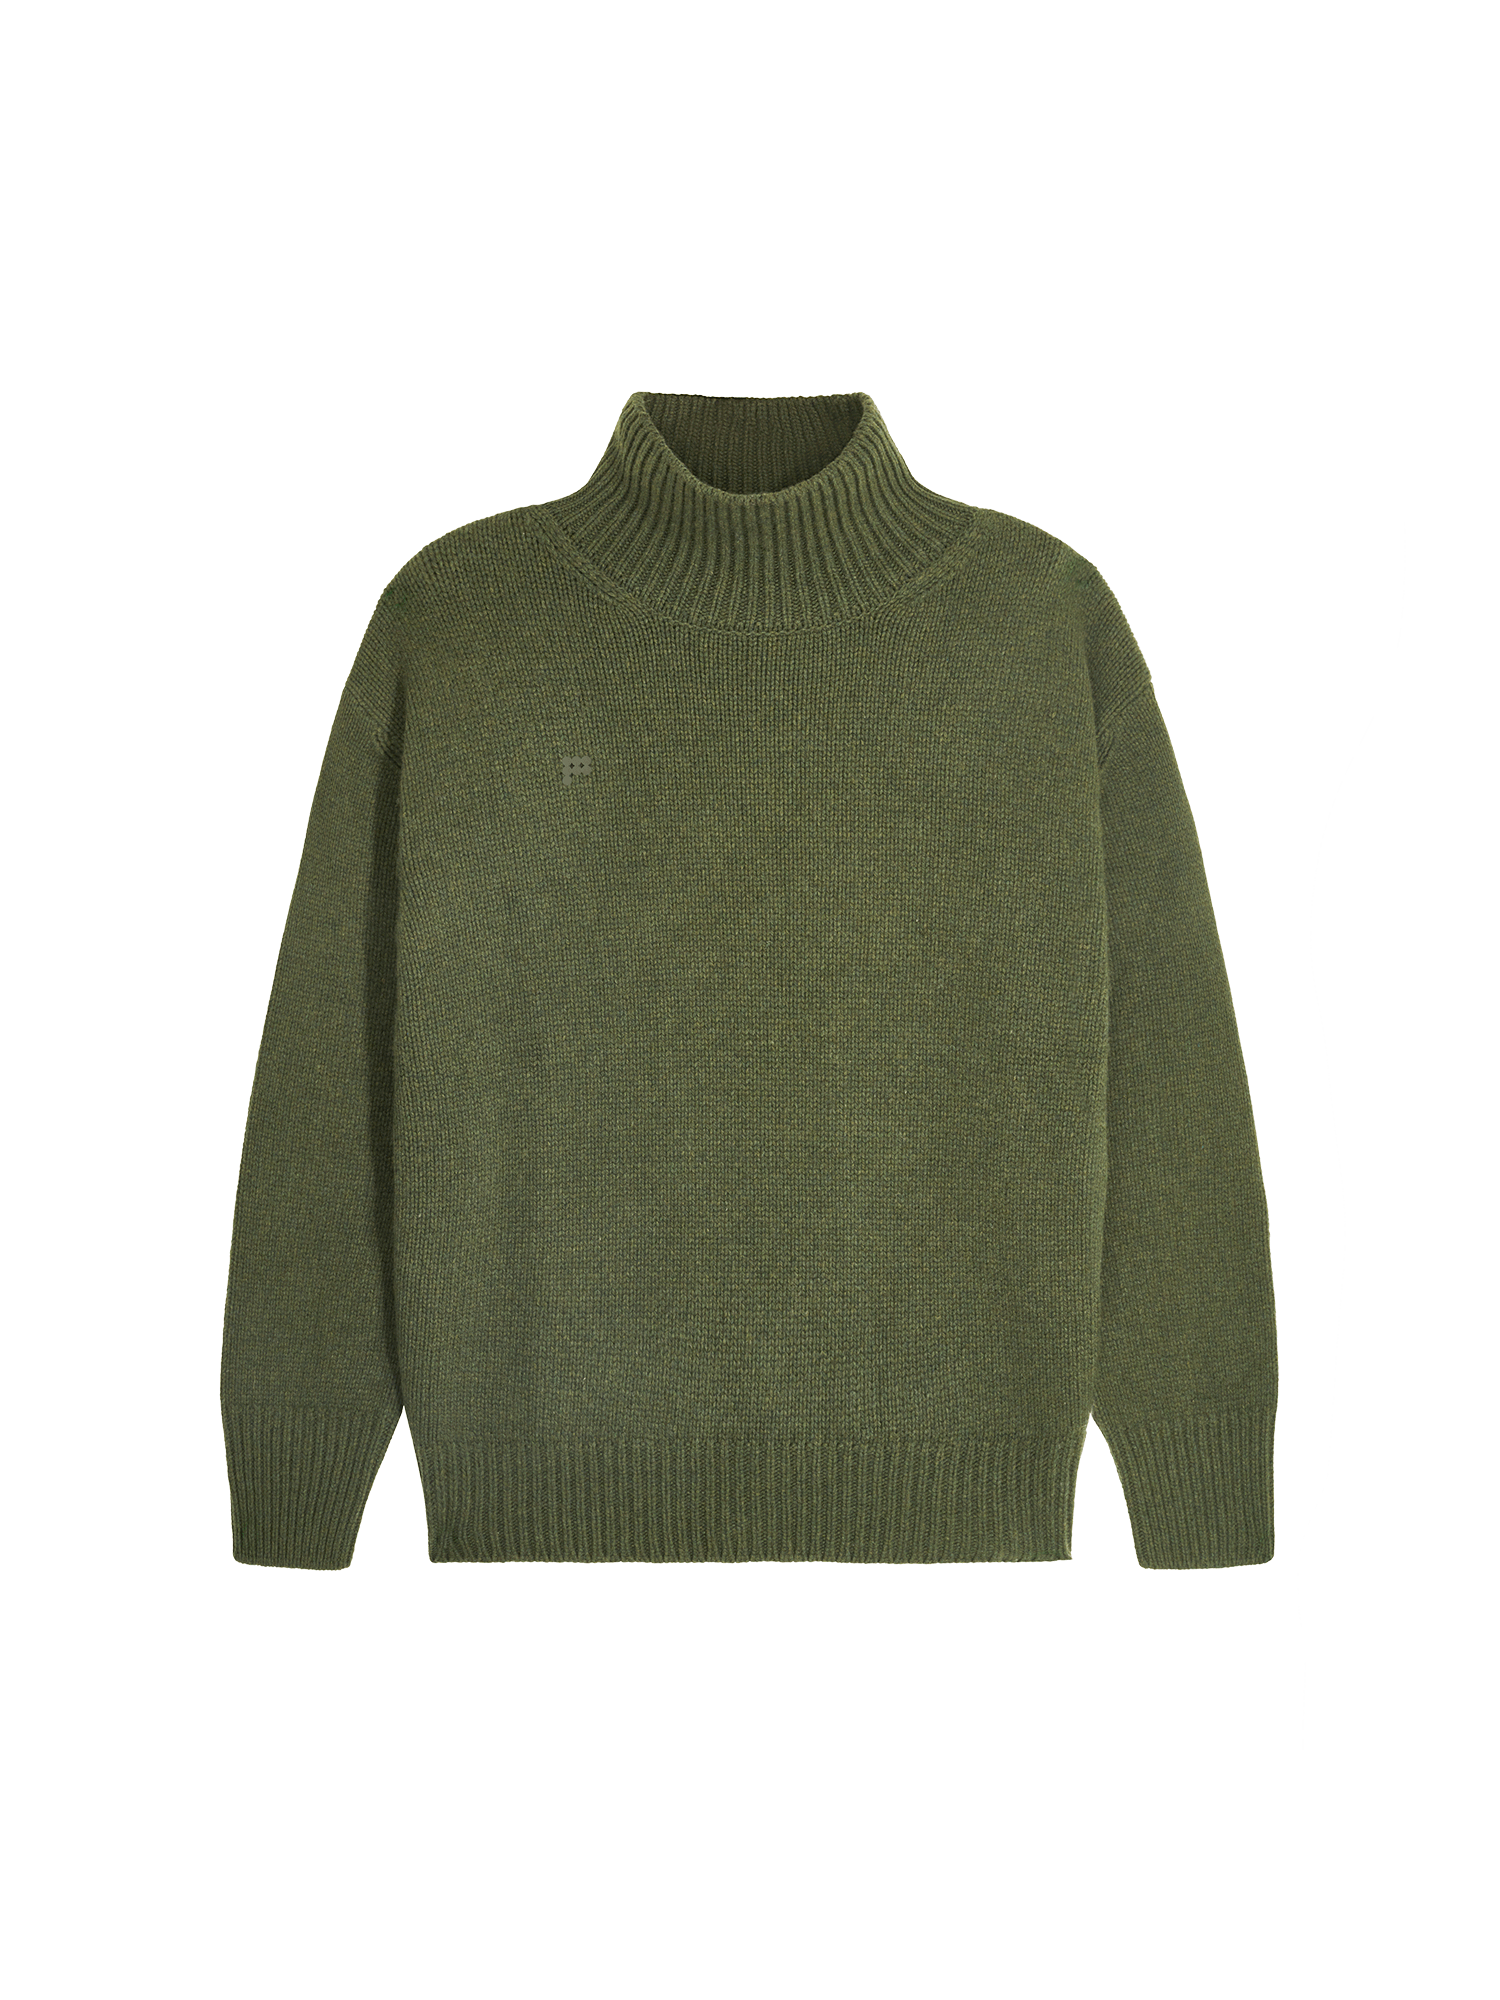 Mens_Recycled_Cashmere_Knit_Chunky_Turtleneck_Sweater_Rosemary_Green-packshot-3